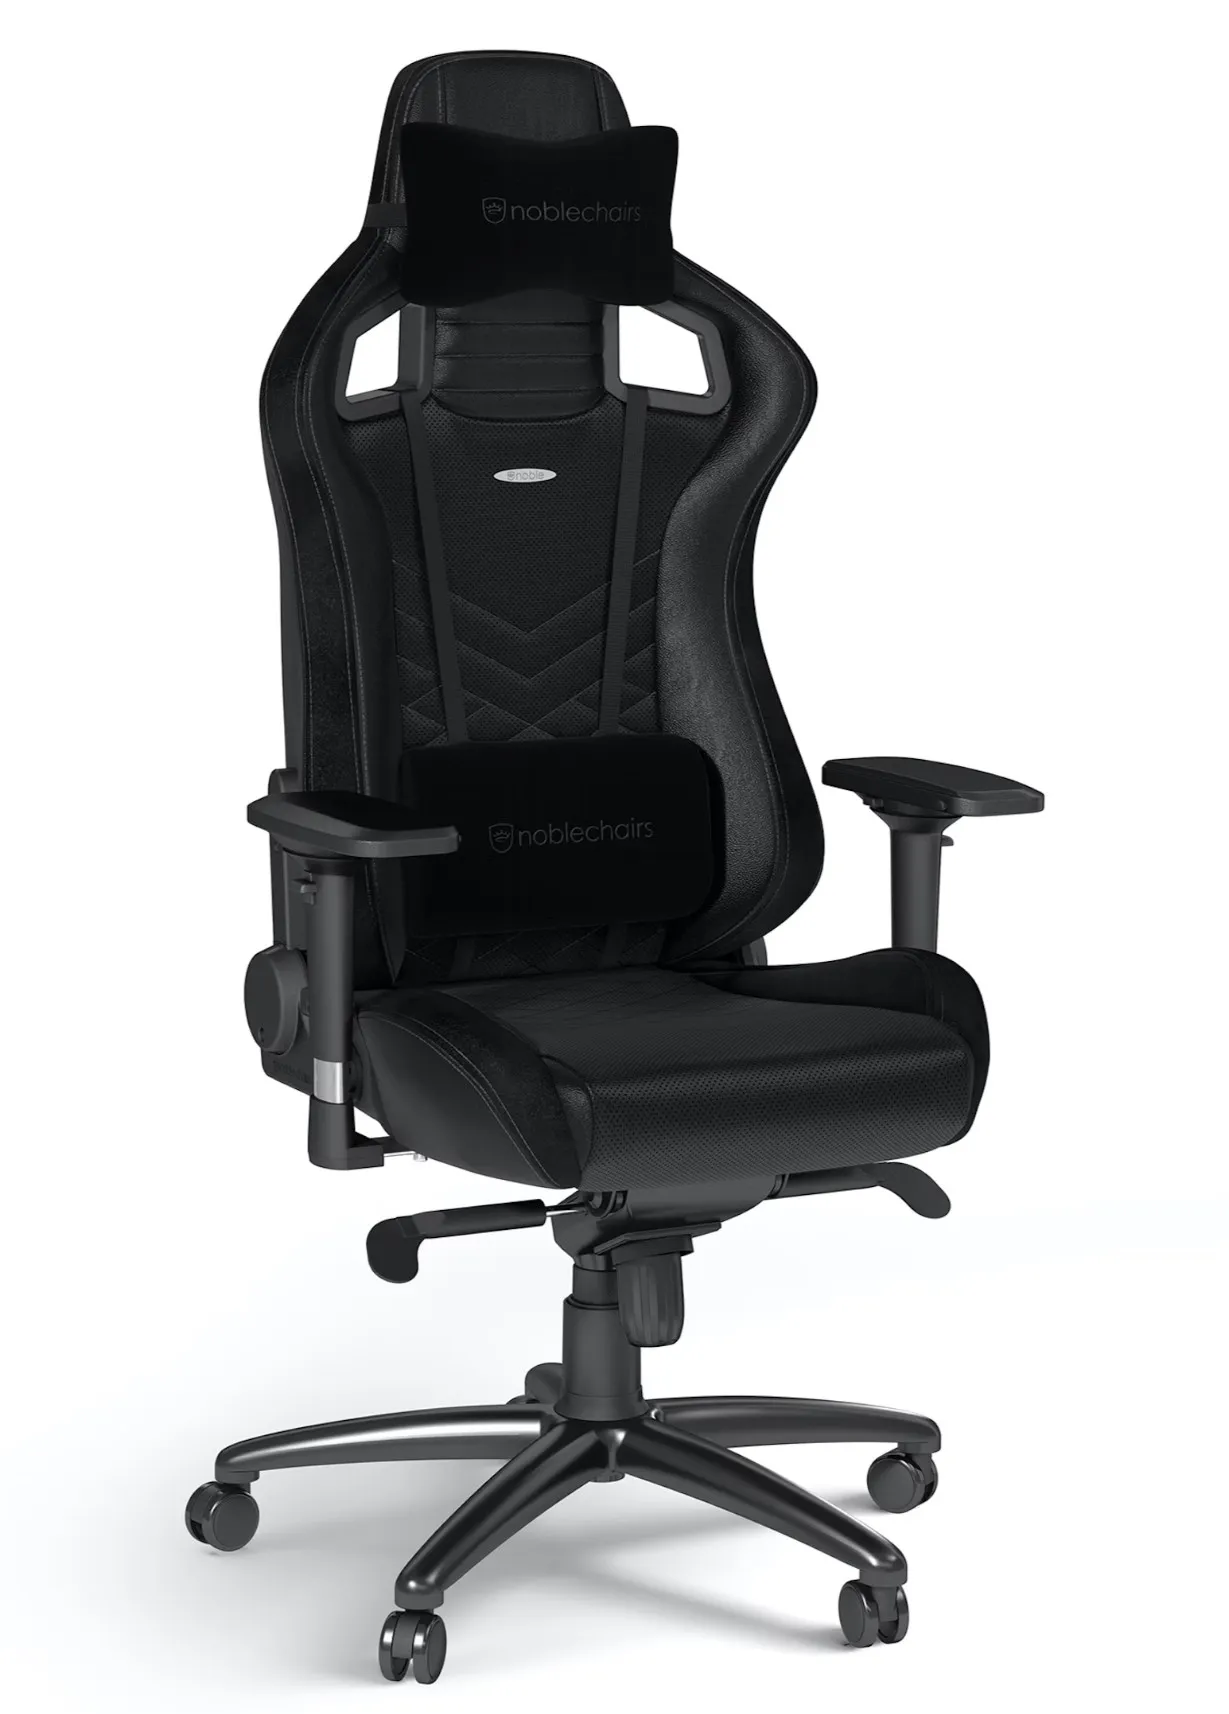 Noblechairs Epic Black 에디션